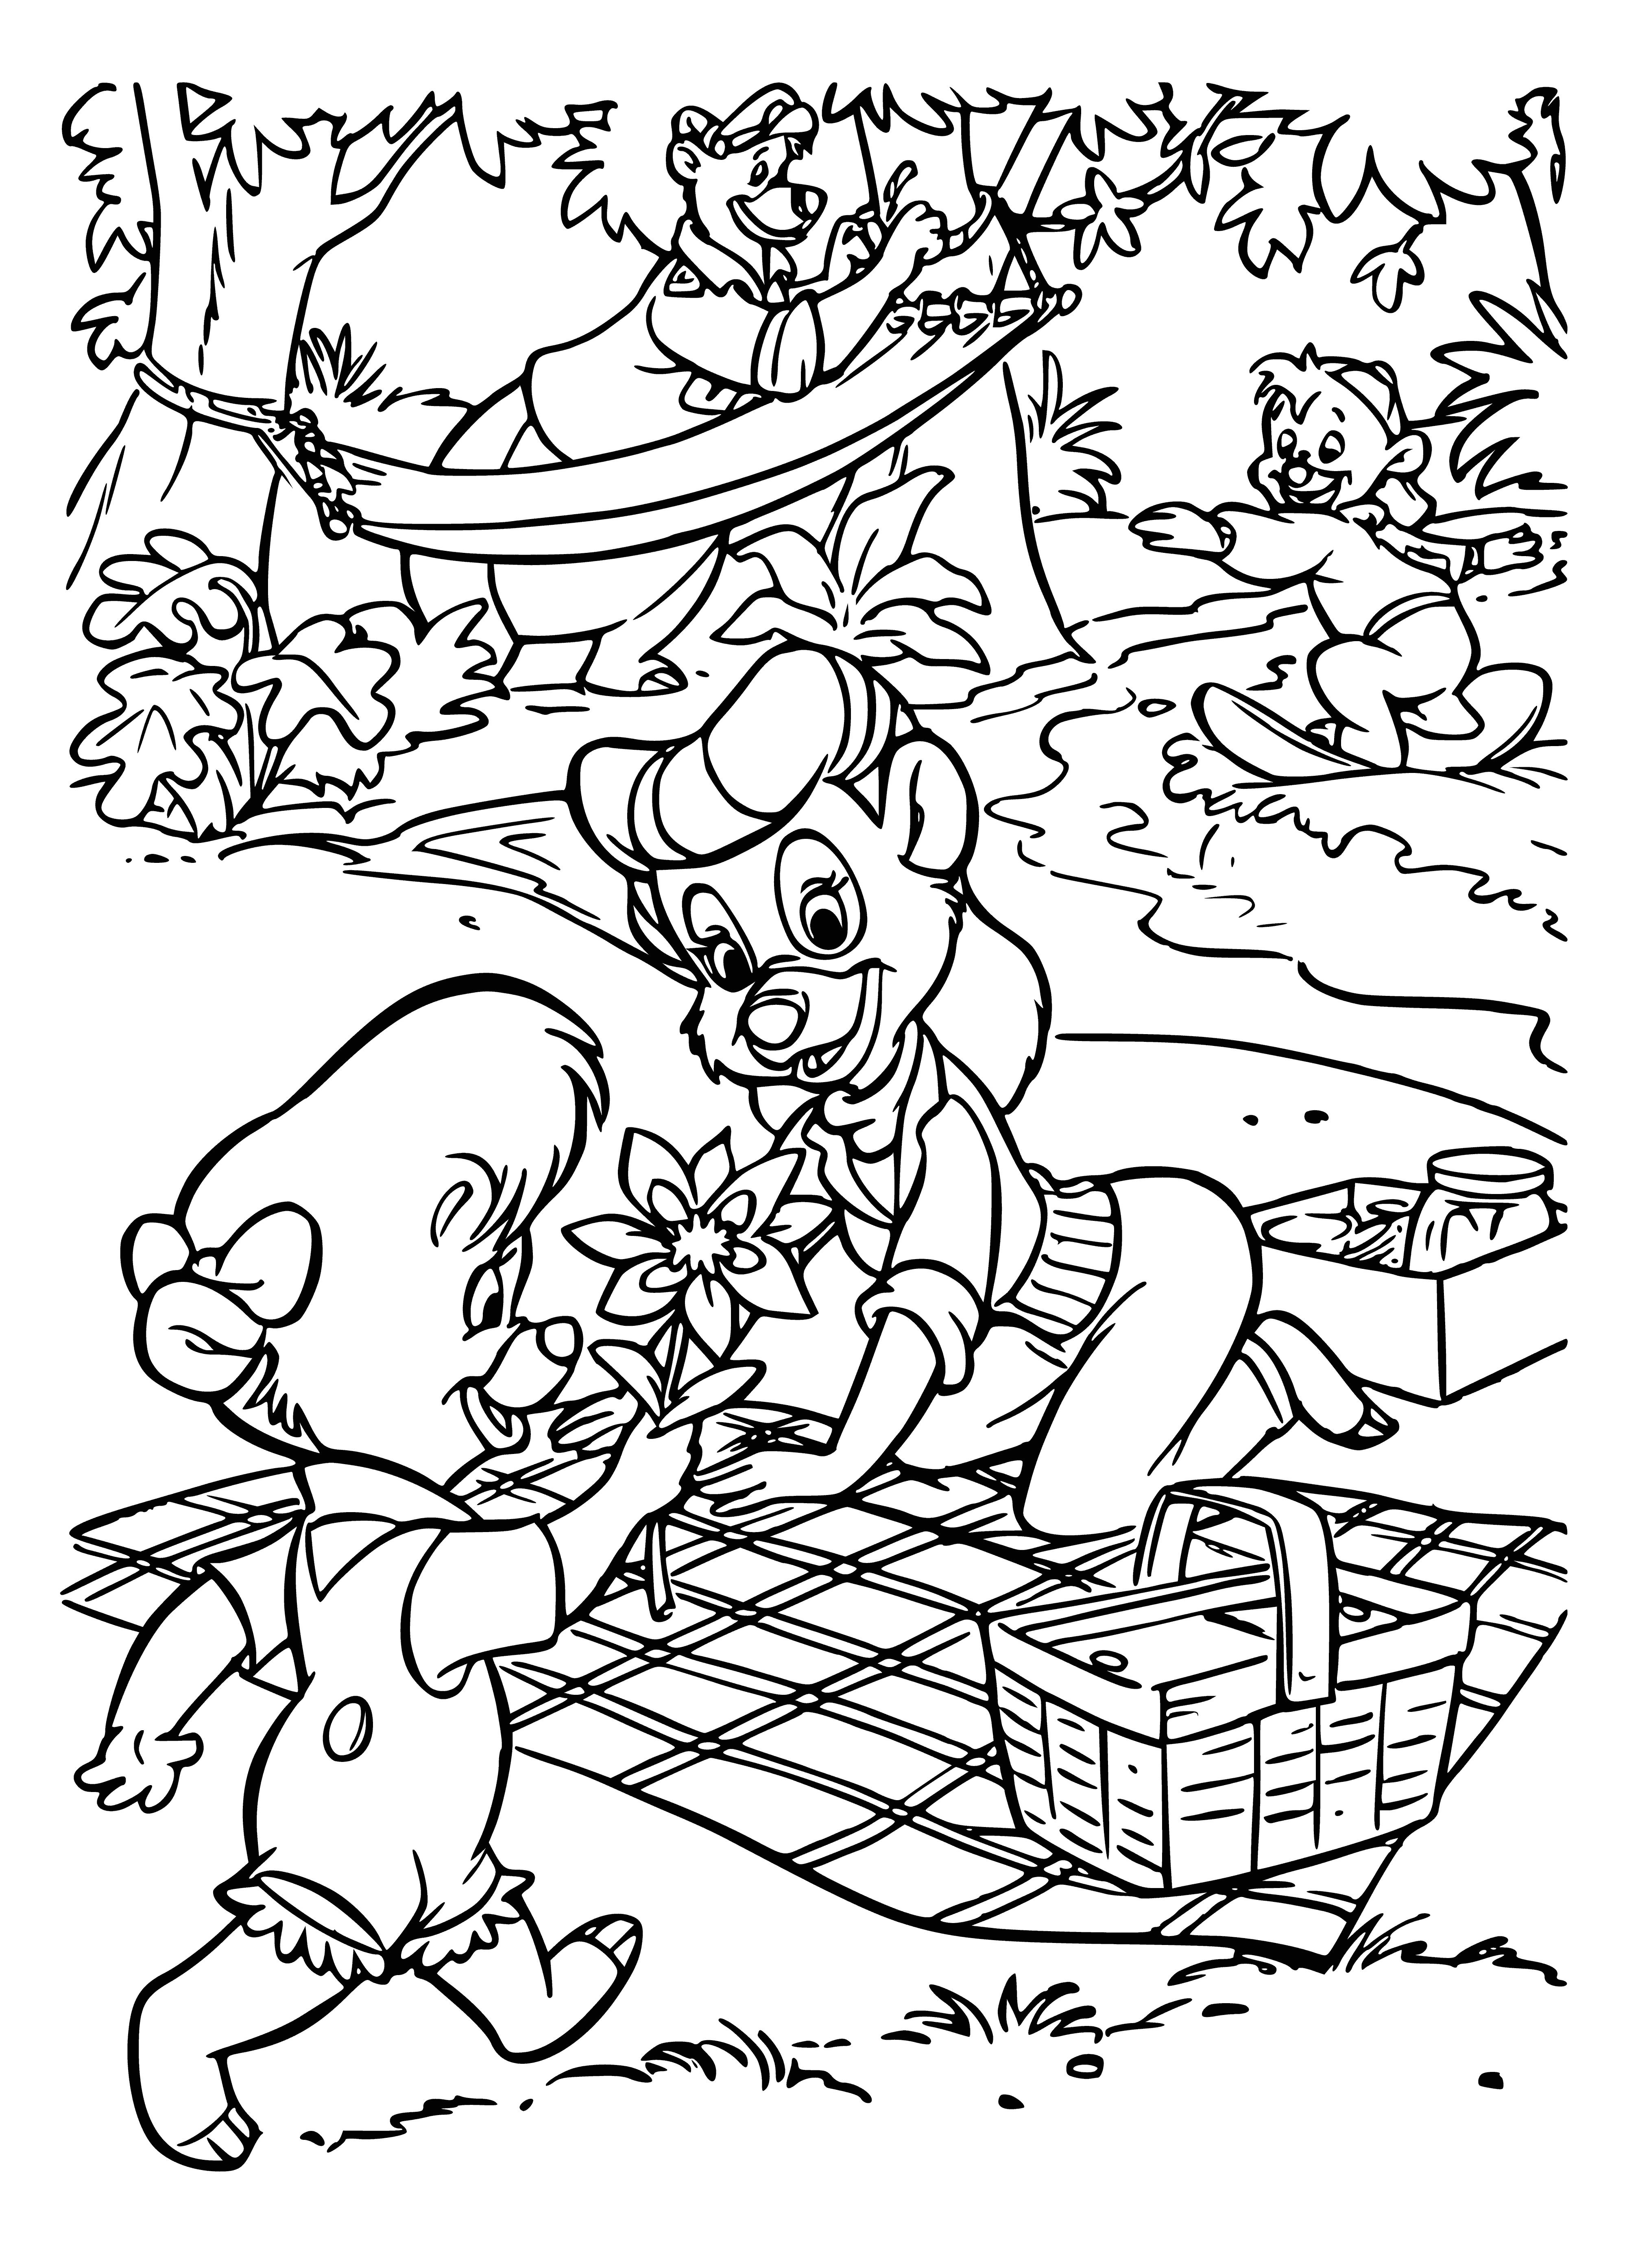 coloring page: Rebecca & Molly, friends full of fun, sit & look at a book, she in a dress, Molly in a blue collar with a bell. #bestfriendgoals